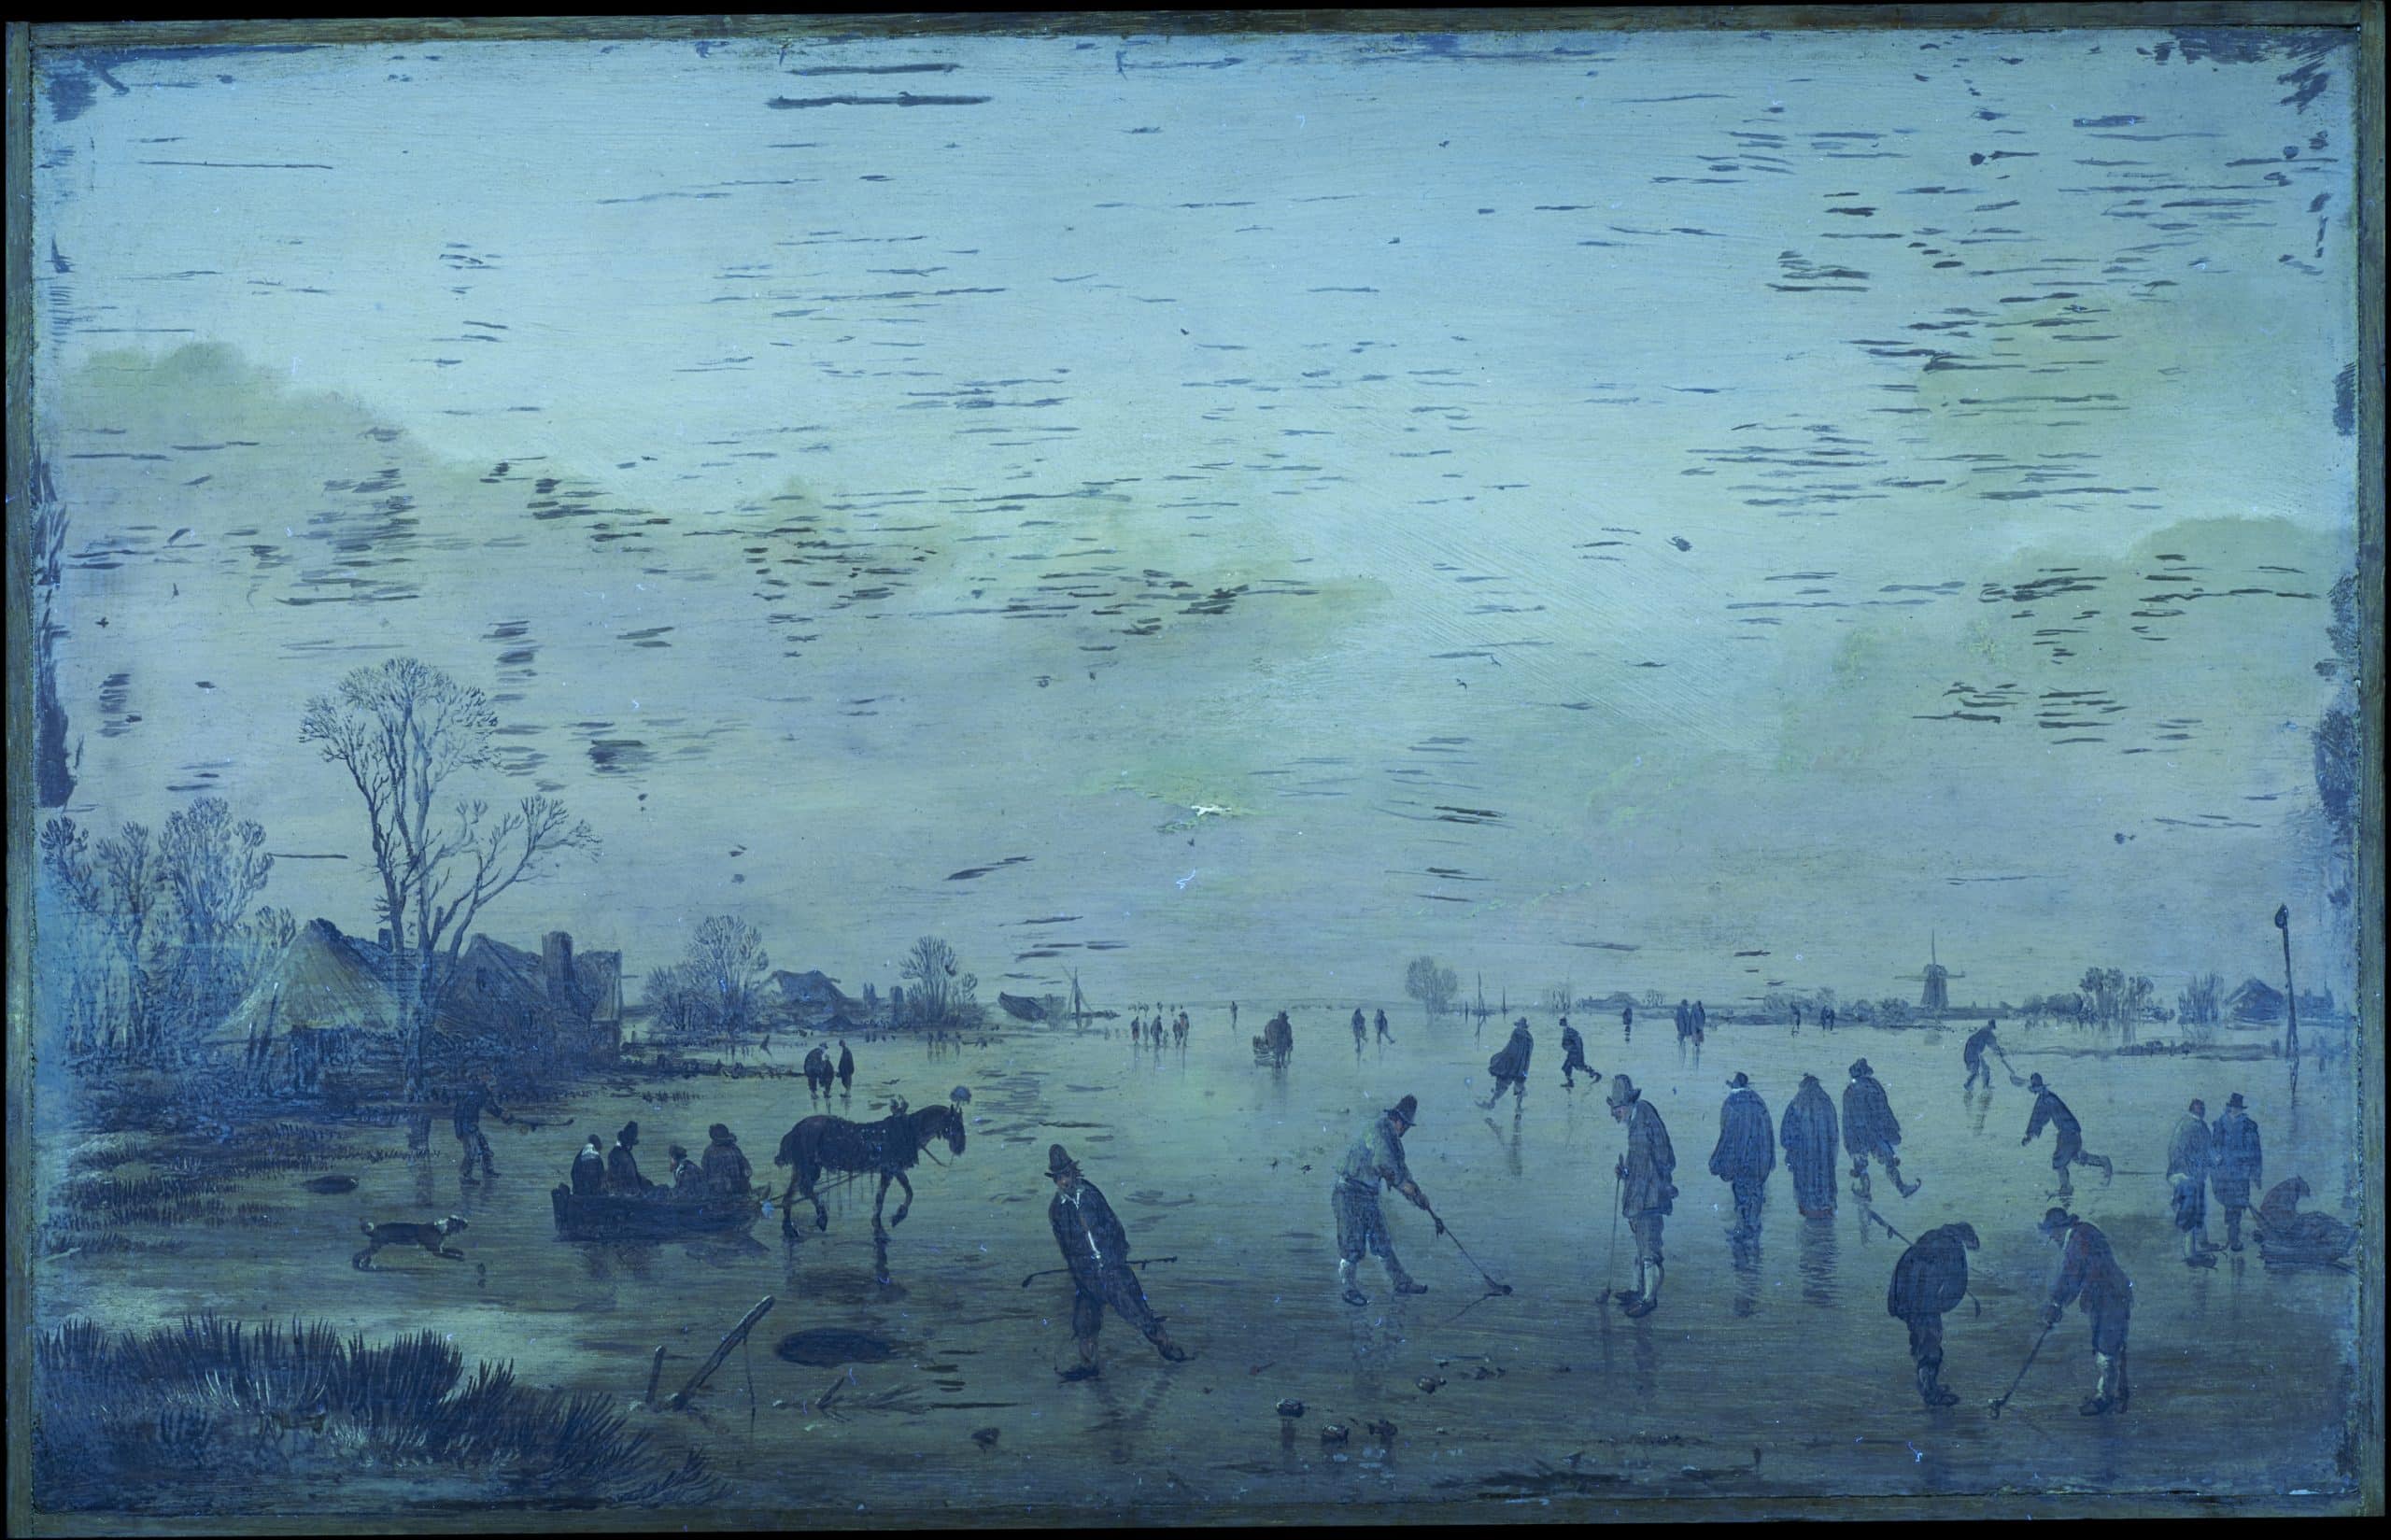 UV illumination of Aert van der Neer’s Untitled, A Frozen Waterway with Villagers Playing Kolf and Skating and a Horsedrawn Sleigh